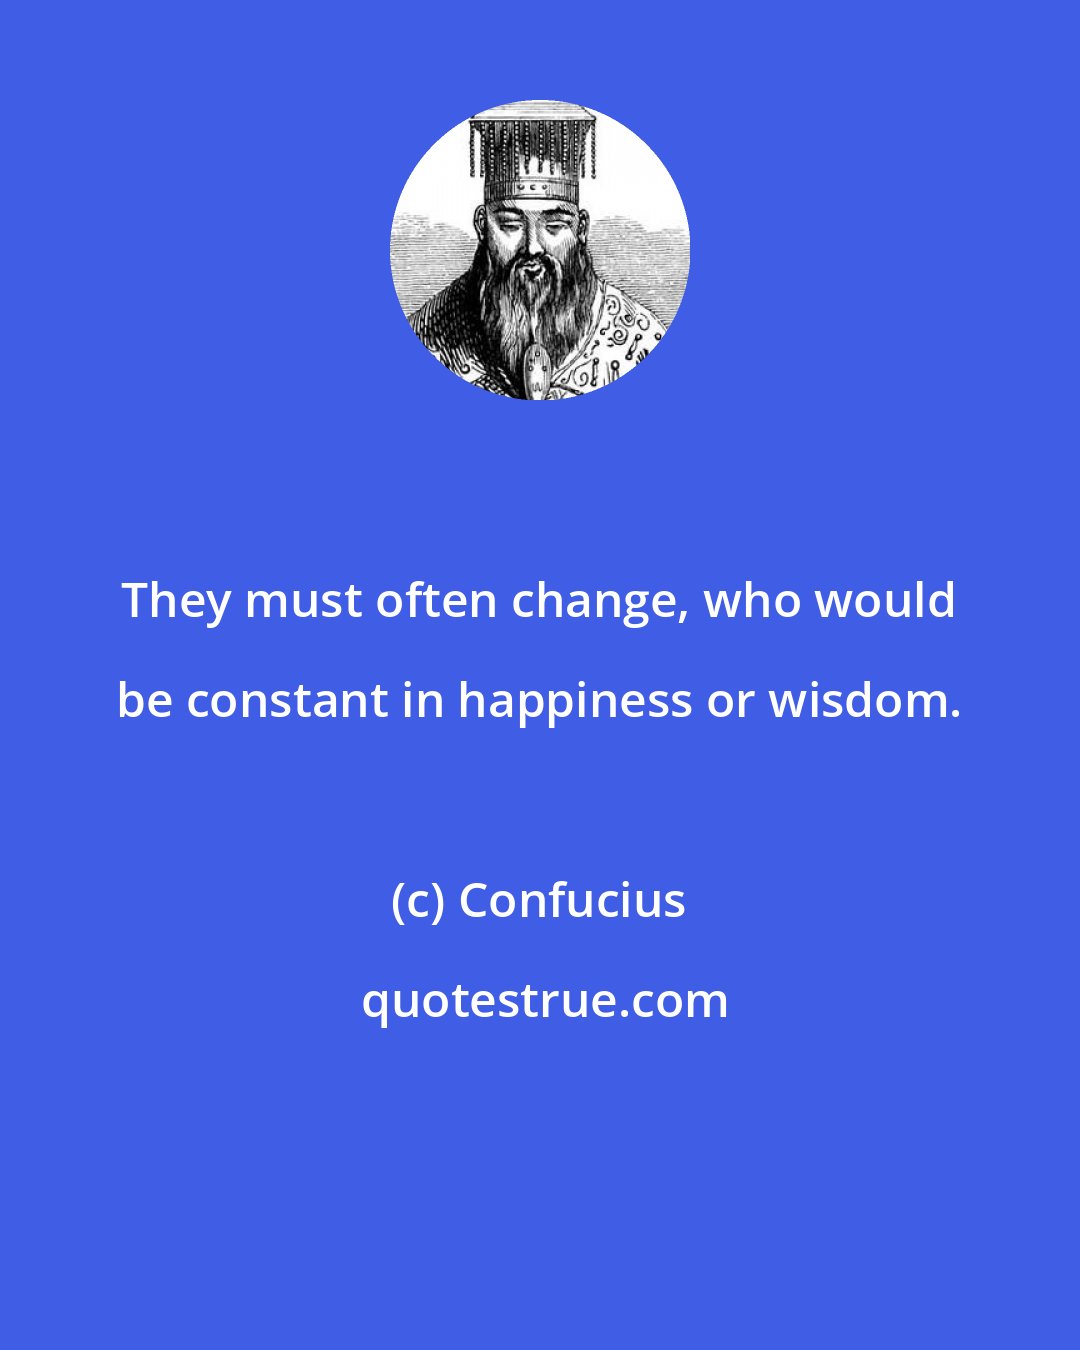 Confucius: They must often change, who would be constant in happiness or wisdom.